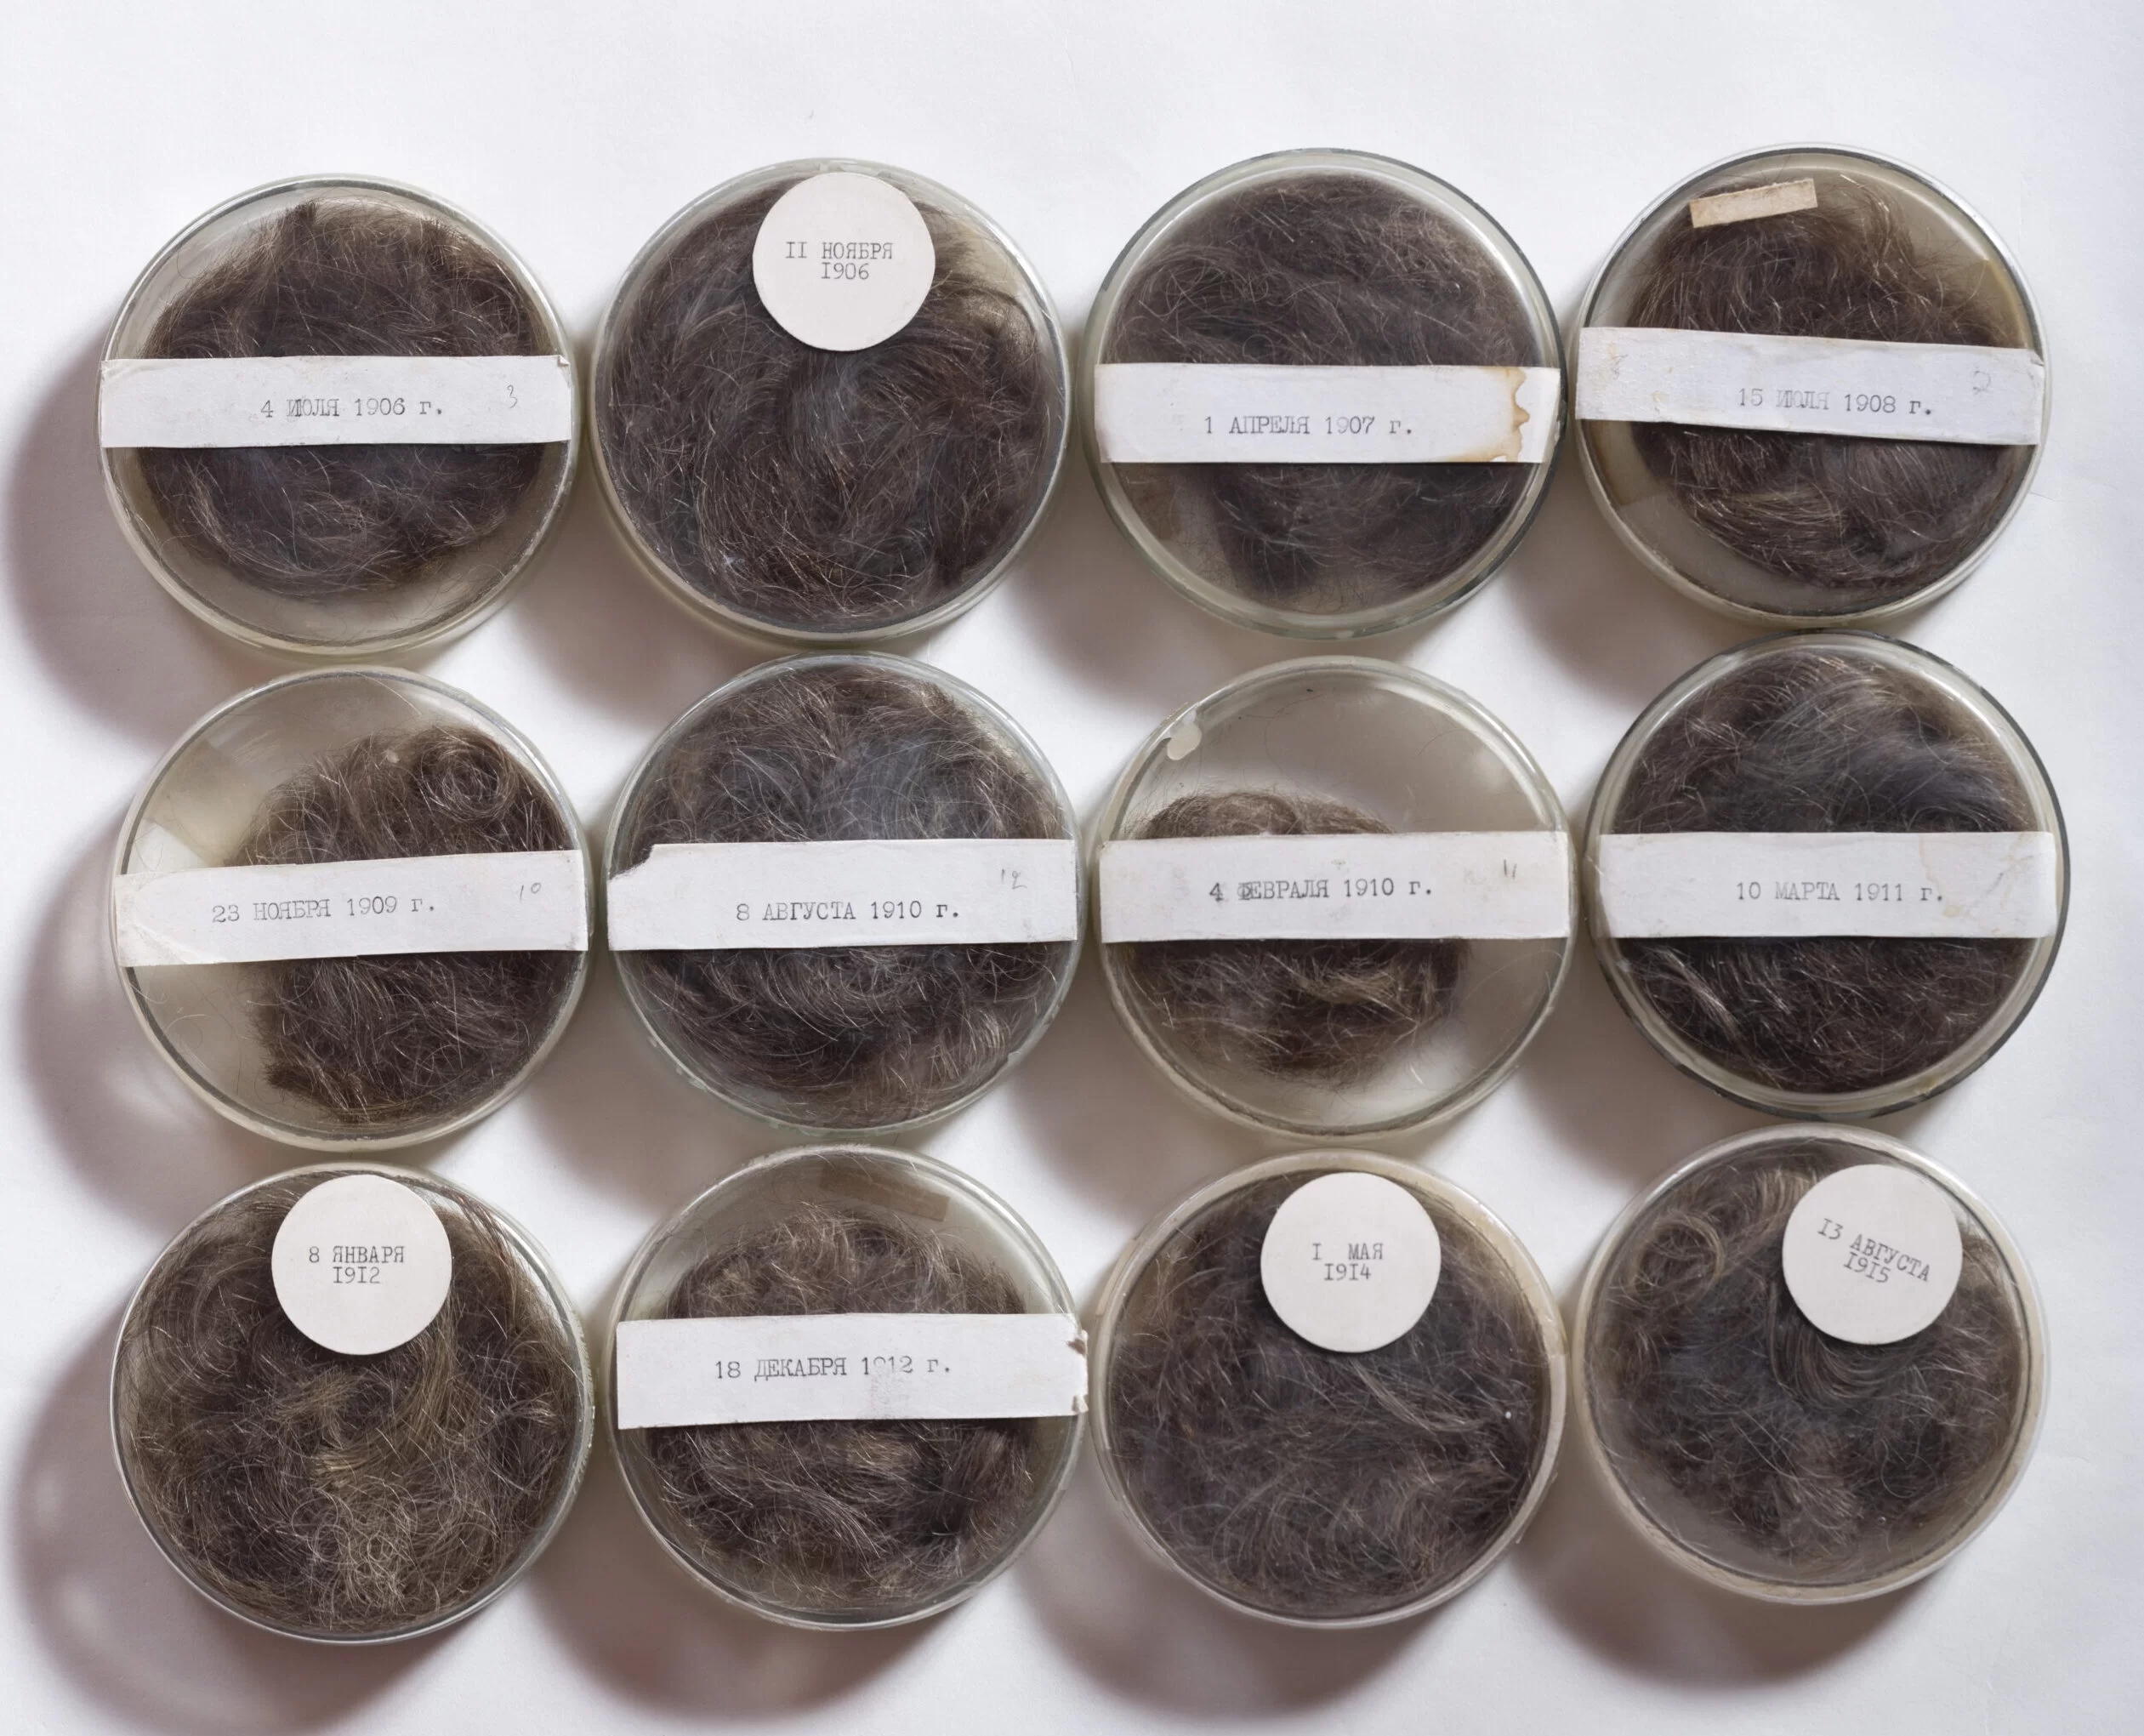 12 petri dishes filled with hair that is brown in color. Top paper slips with typewritten dates.